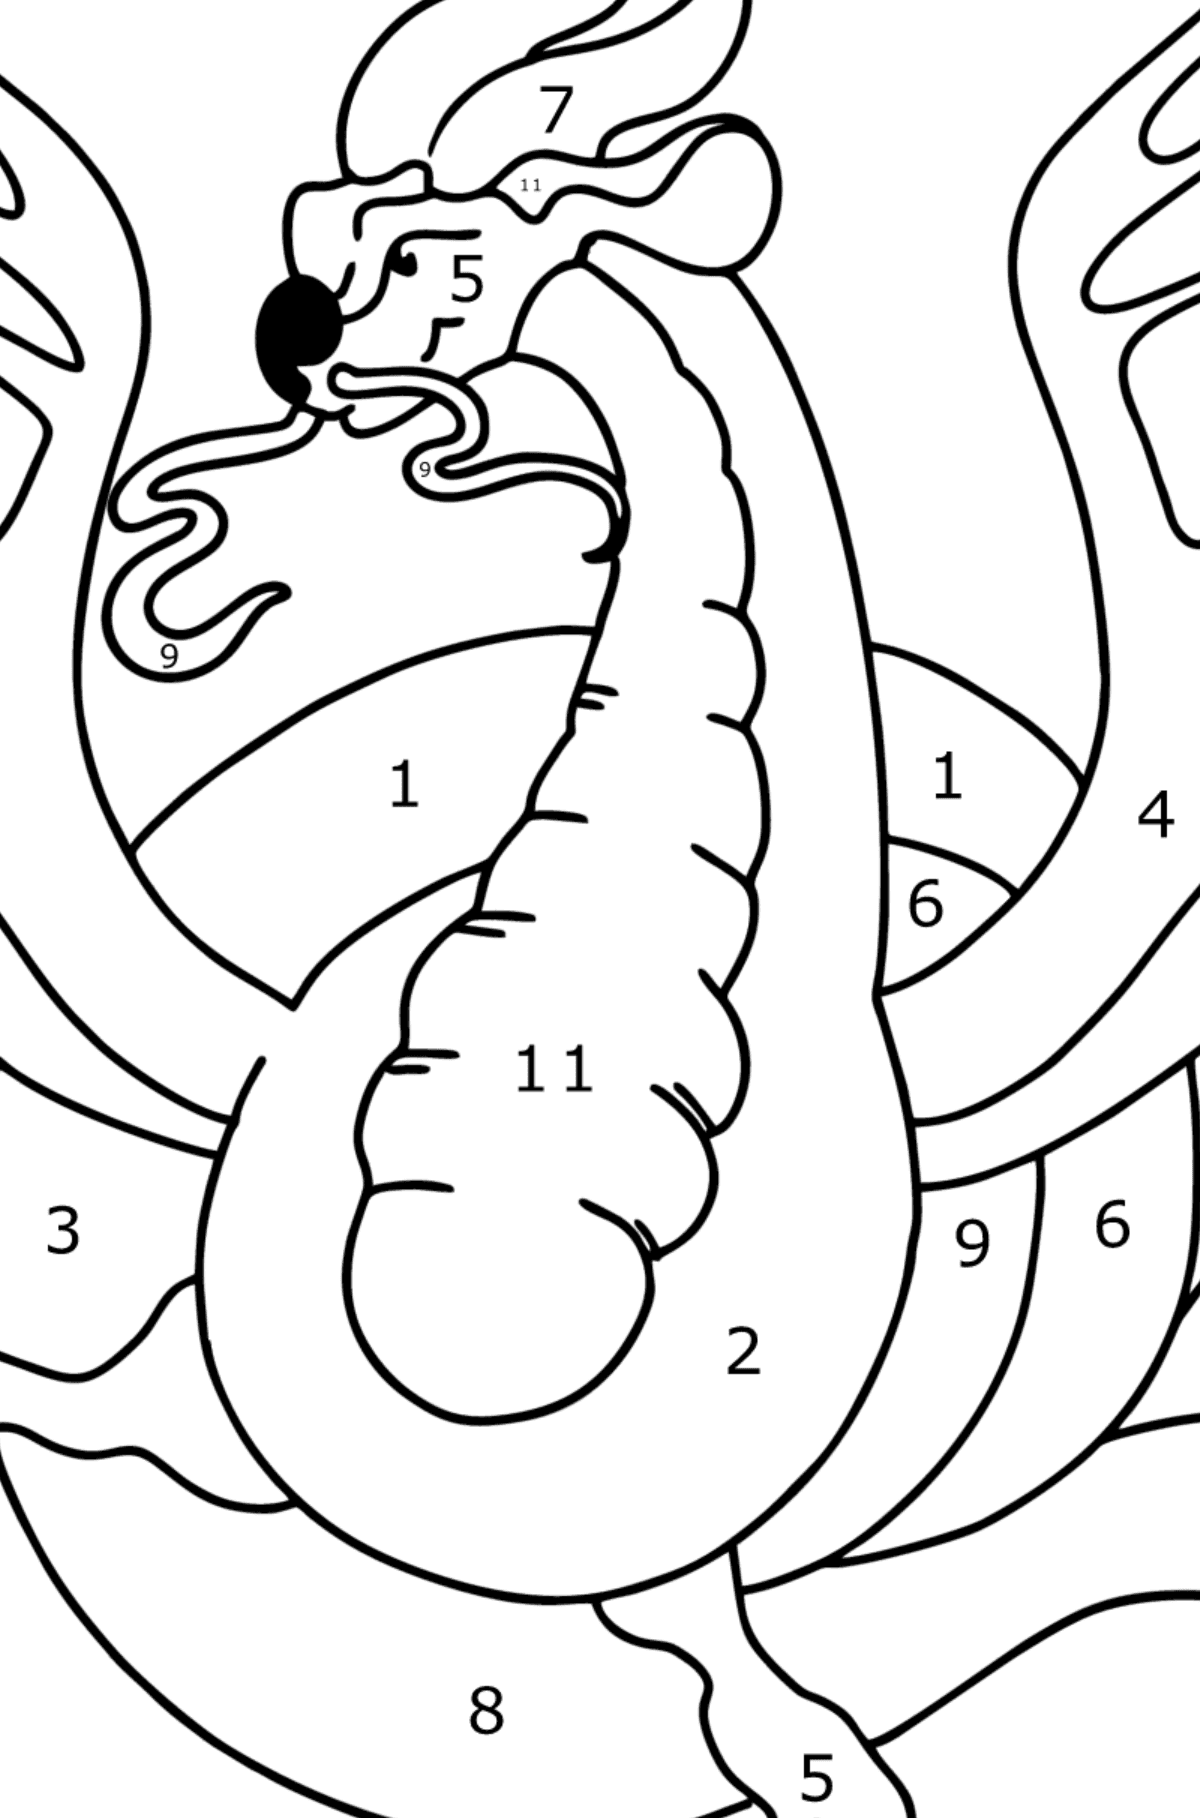 Dangerous Dragon coloring page - Coloring by Numbers for Kids